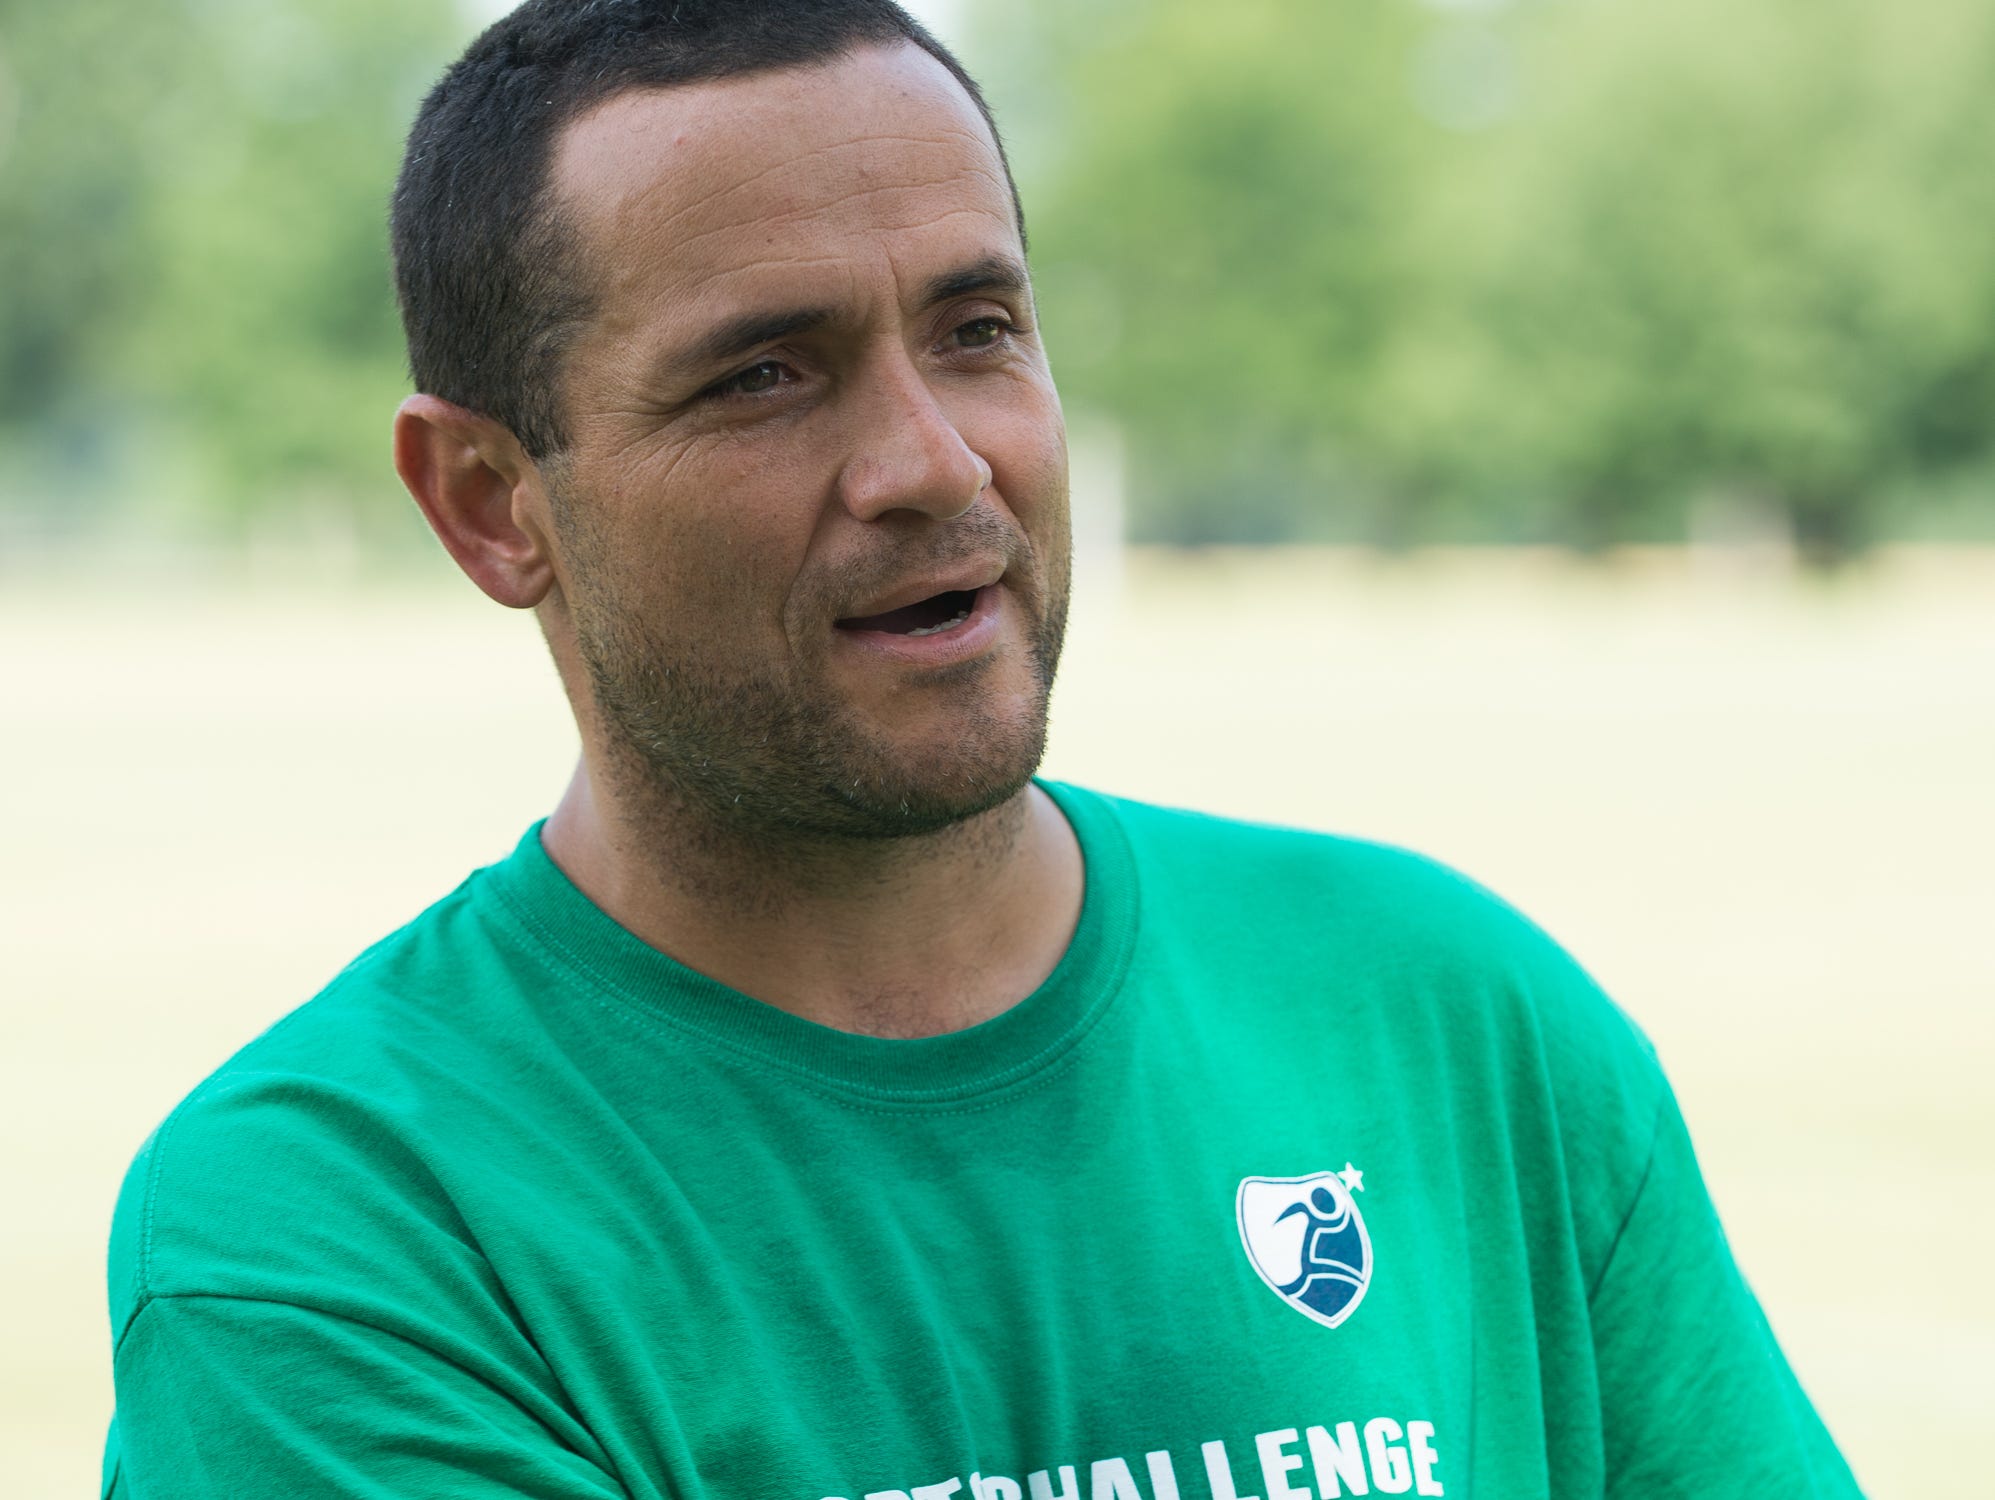 Soccer coach Jesse Gonzalez of San Diego, CA., talks about coaching at the Strive Sports Challenge at St. Andrew's School in Middletown, Del,.